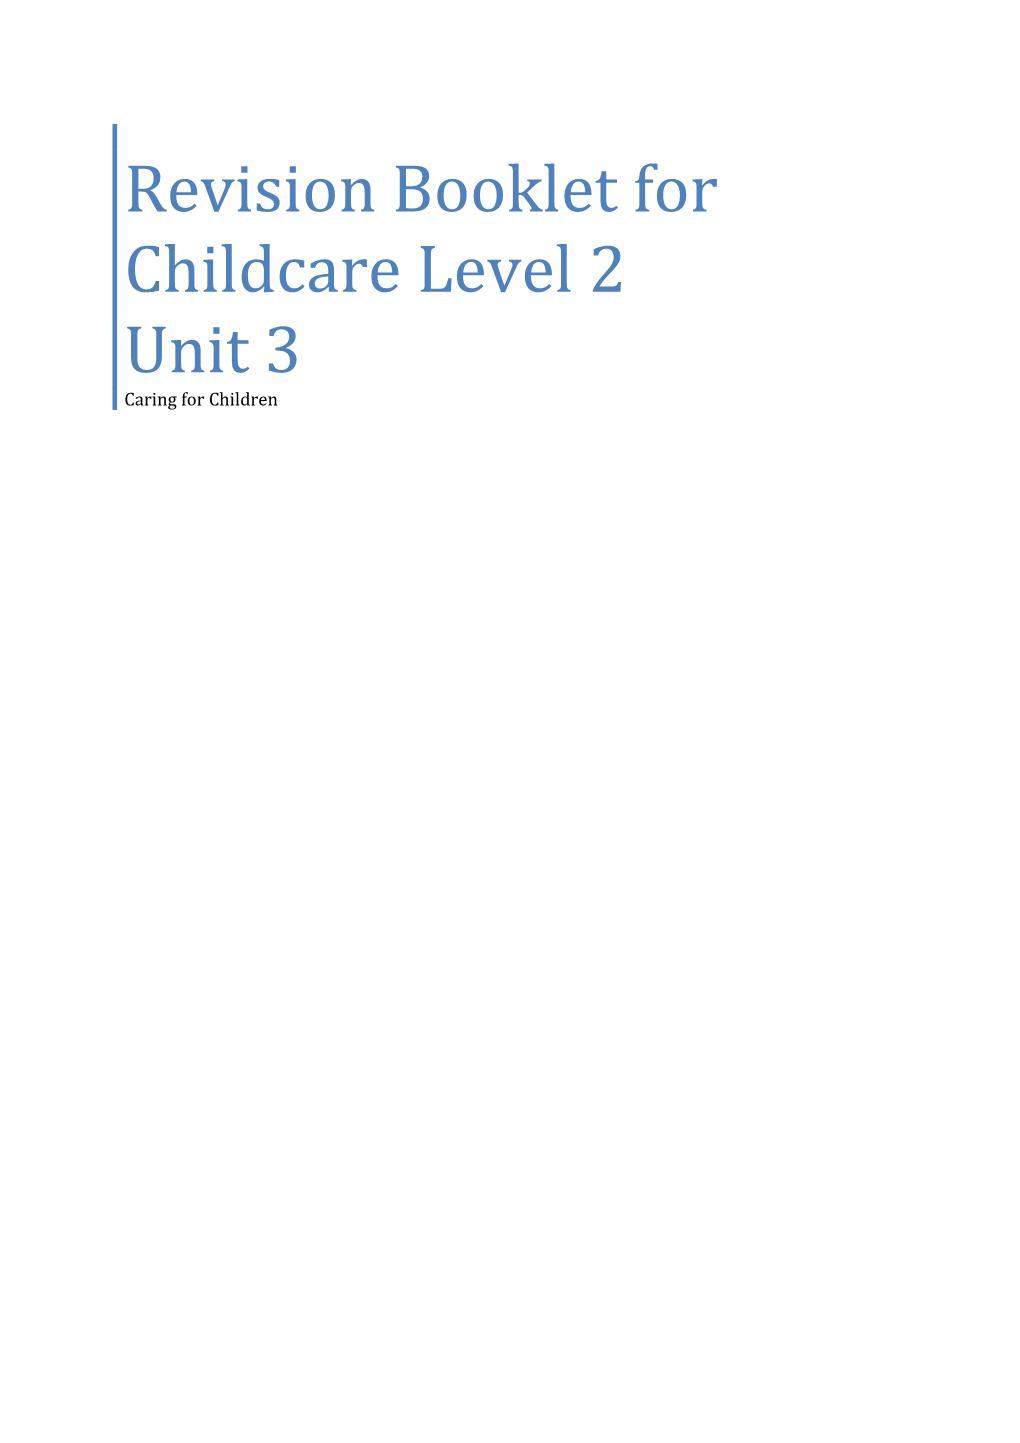 Revision Booklet for Childcare Level 2 Unit 3